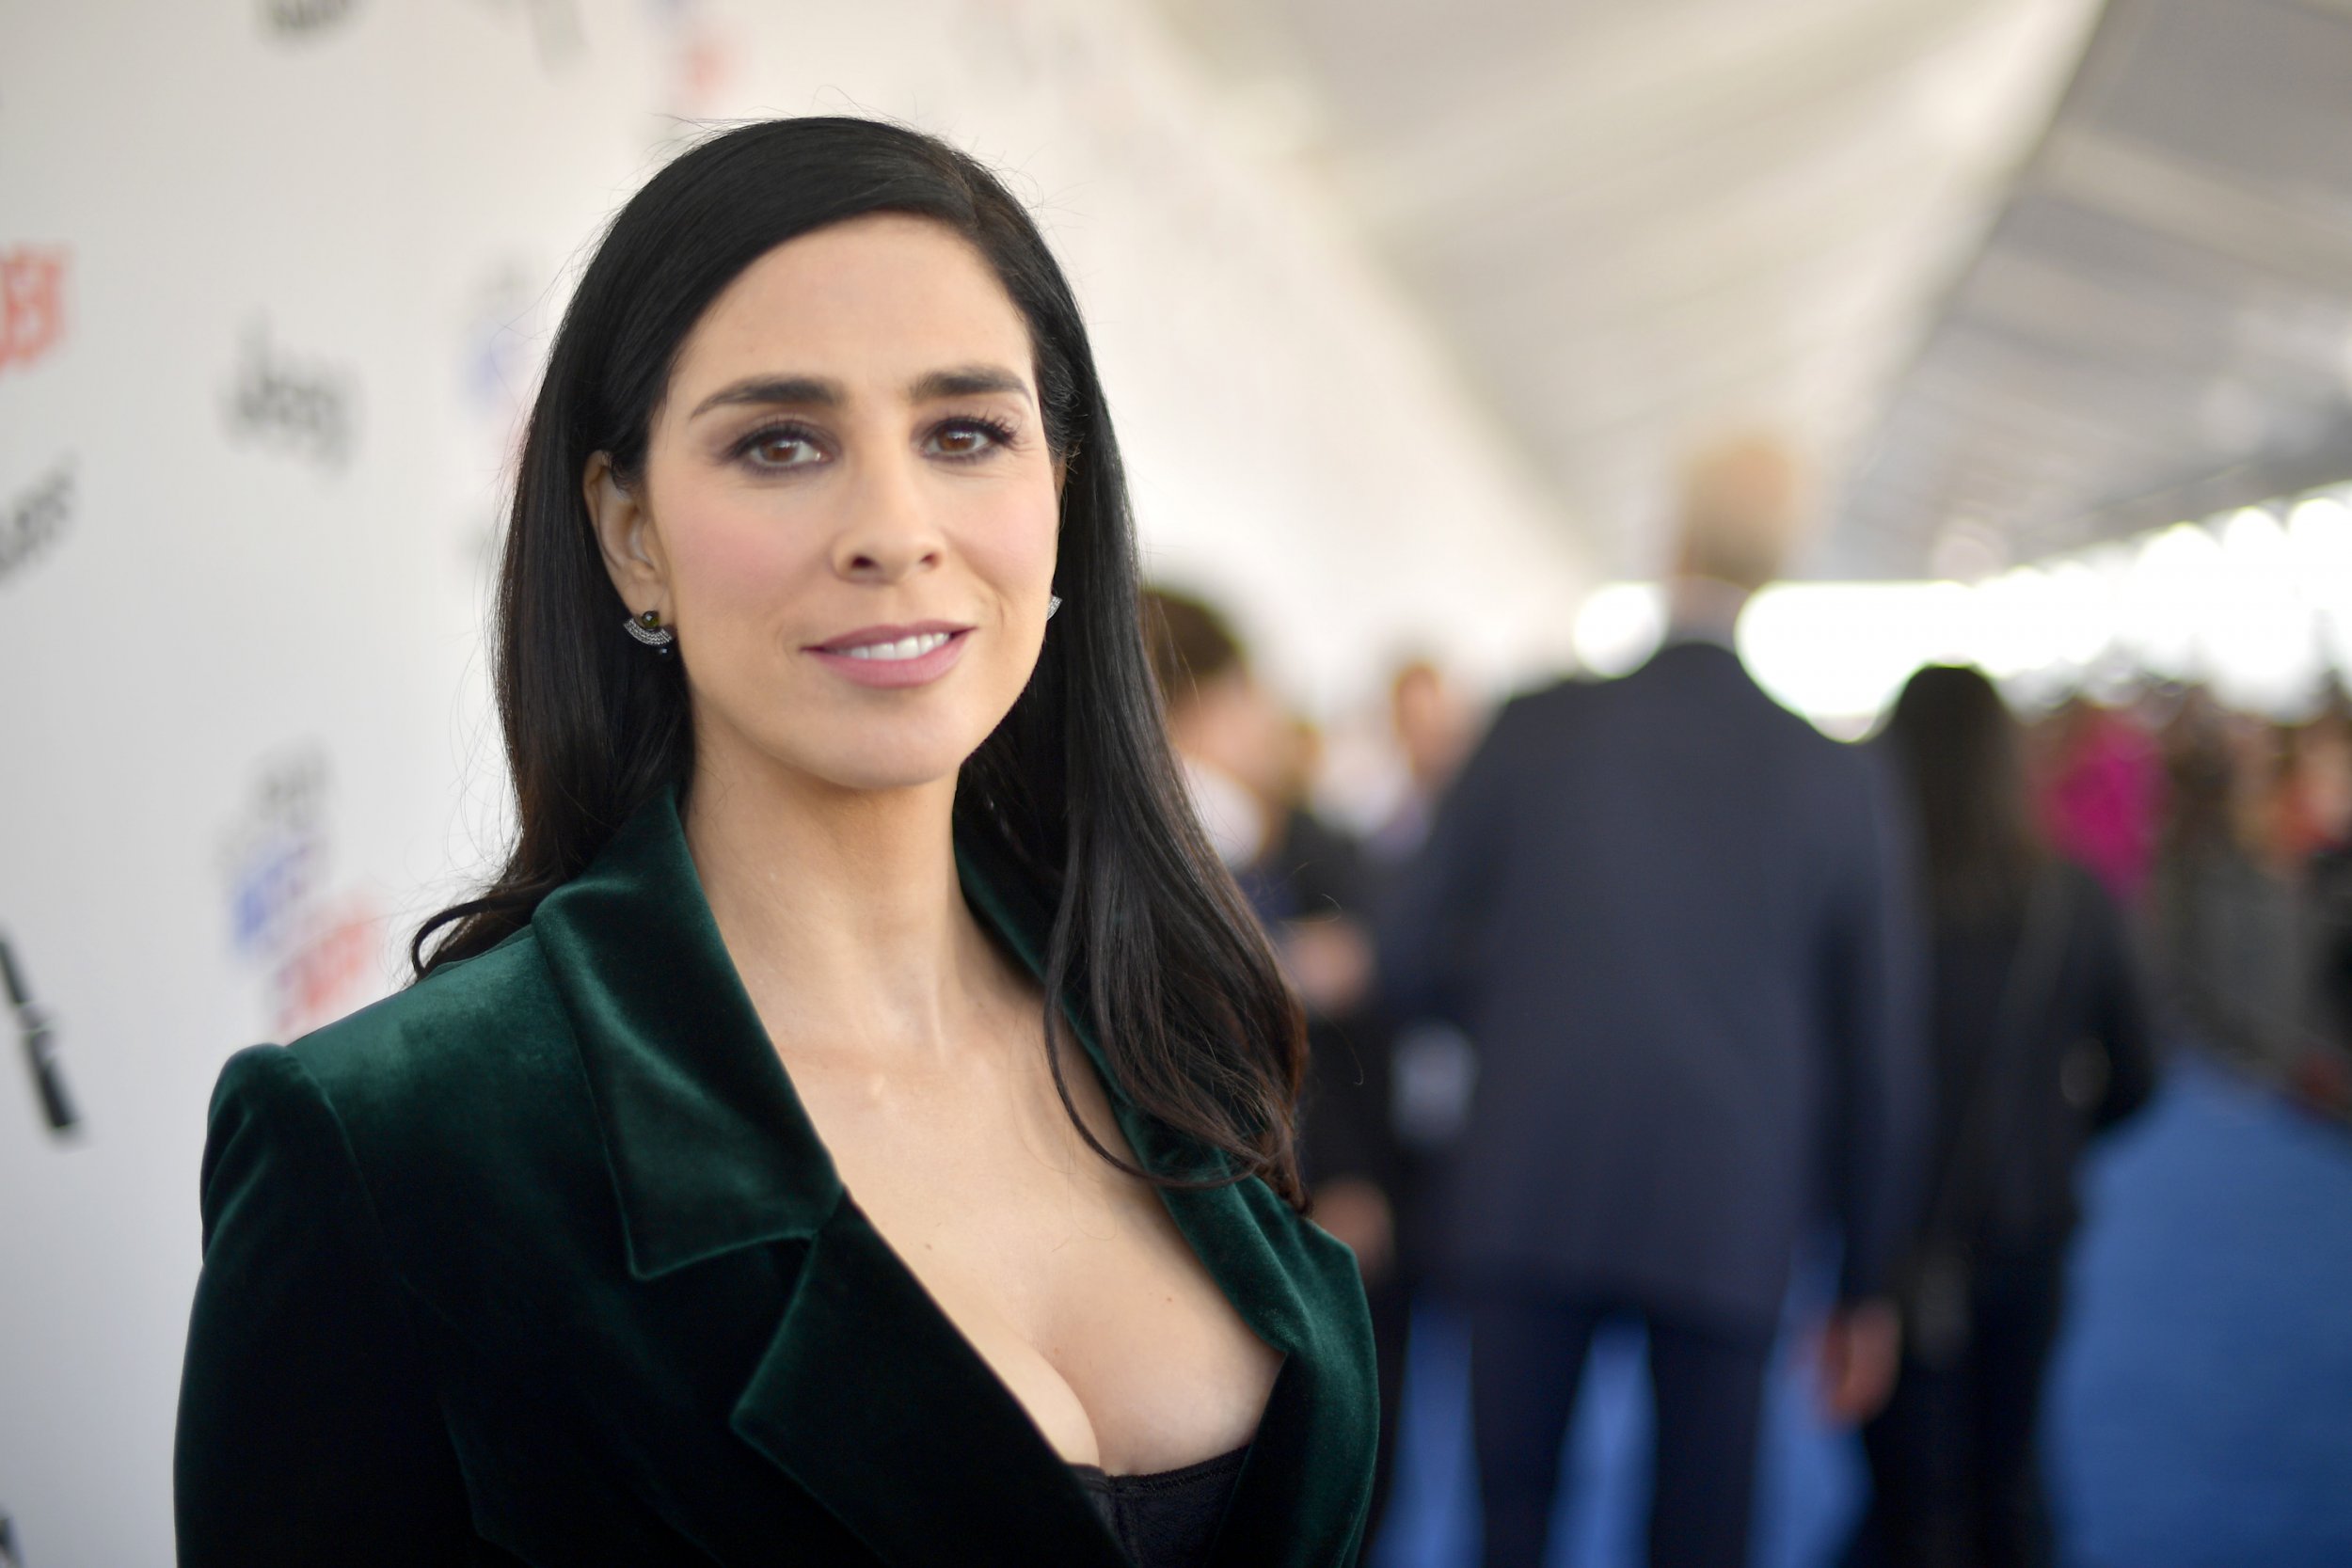 Sarah Silverman Says Louis C.K. Masturbated in Front of Her, Defends Him